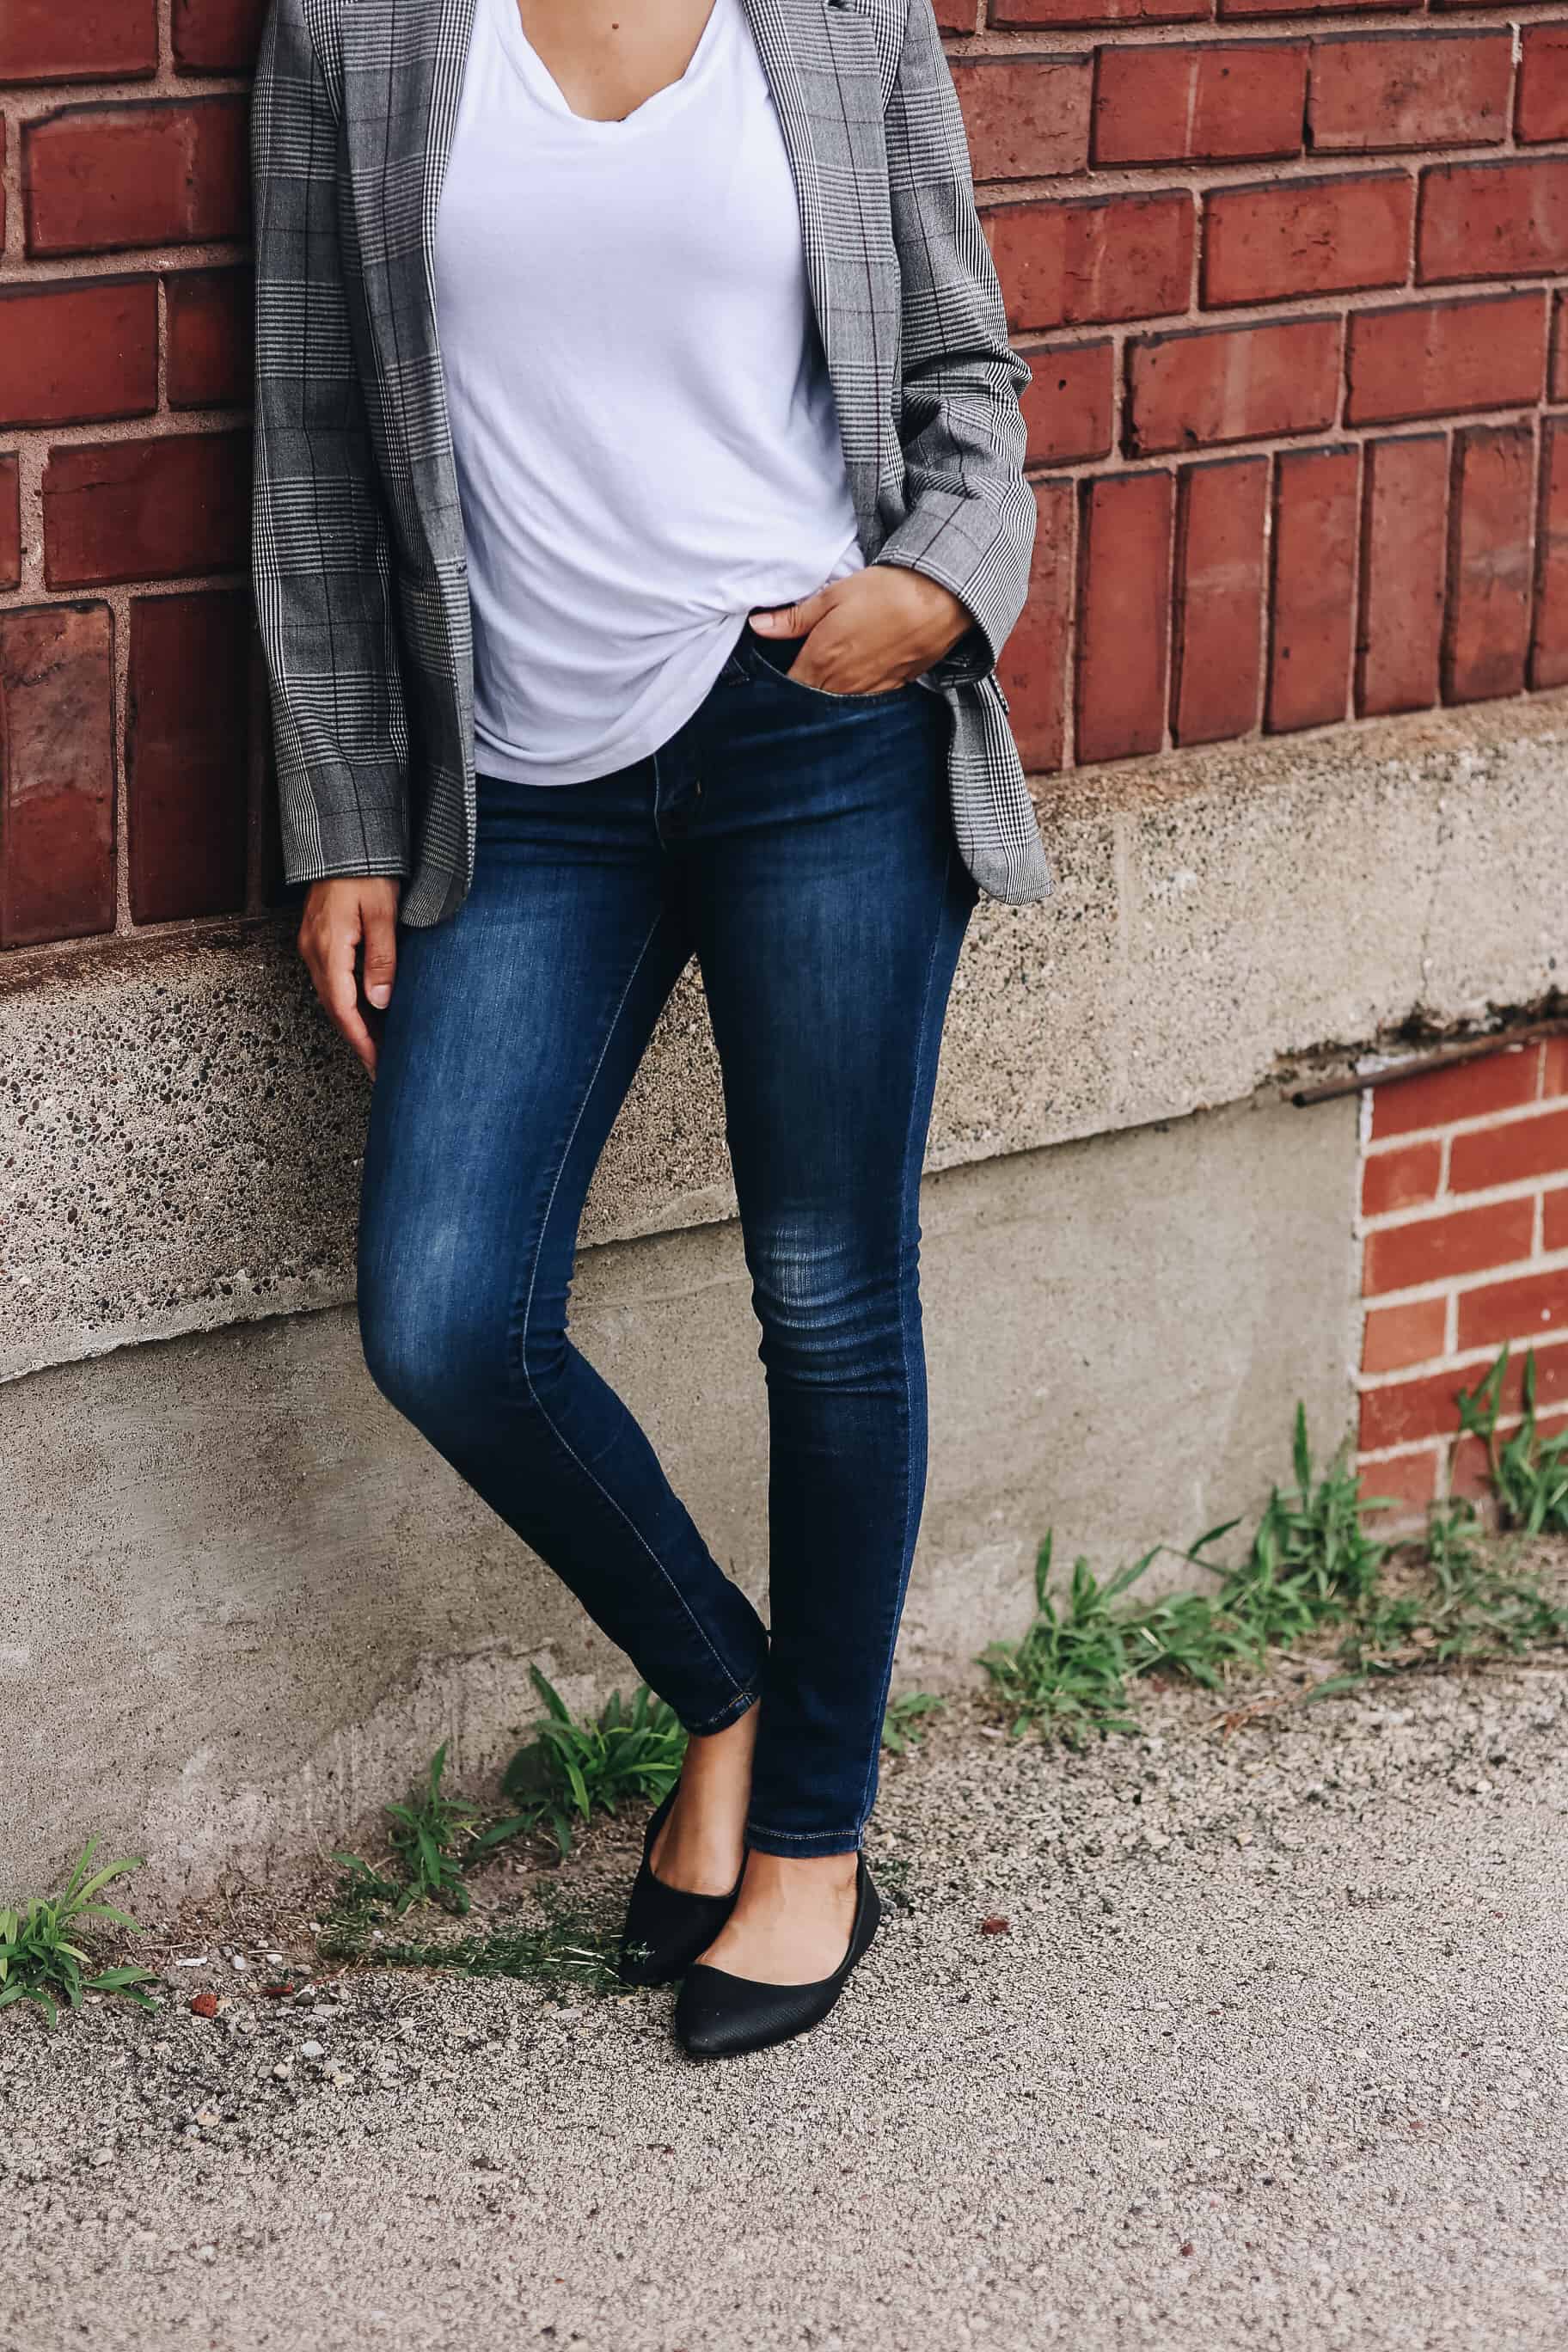 elevate a simple tee and jeans outfit